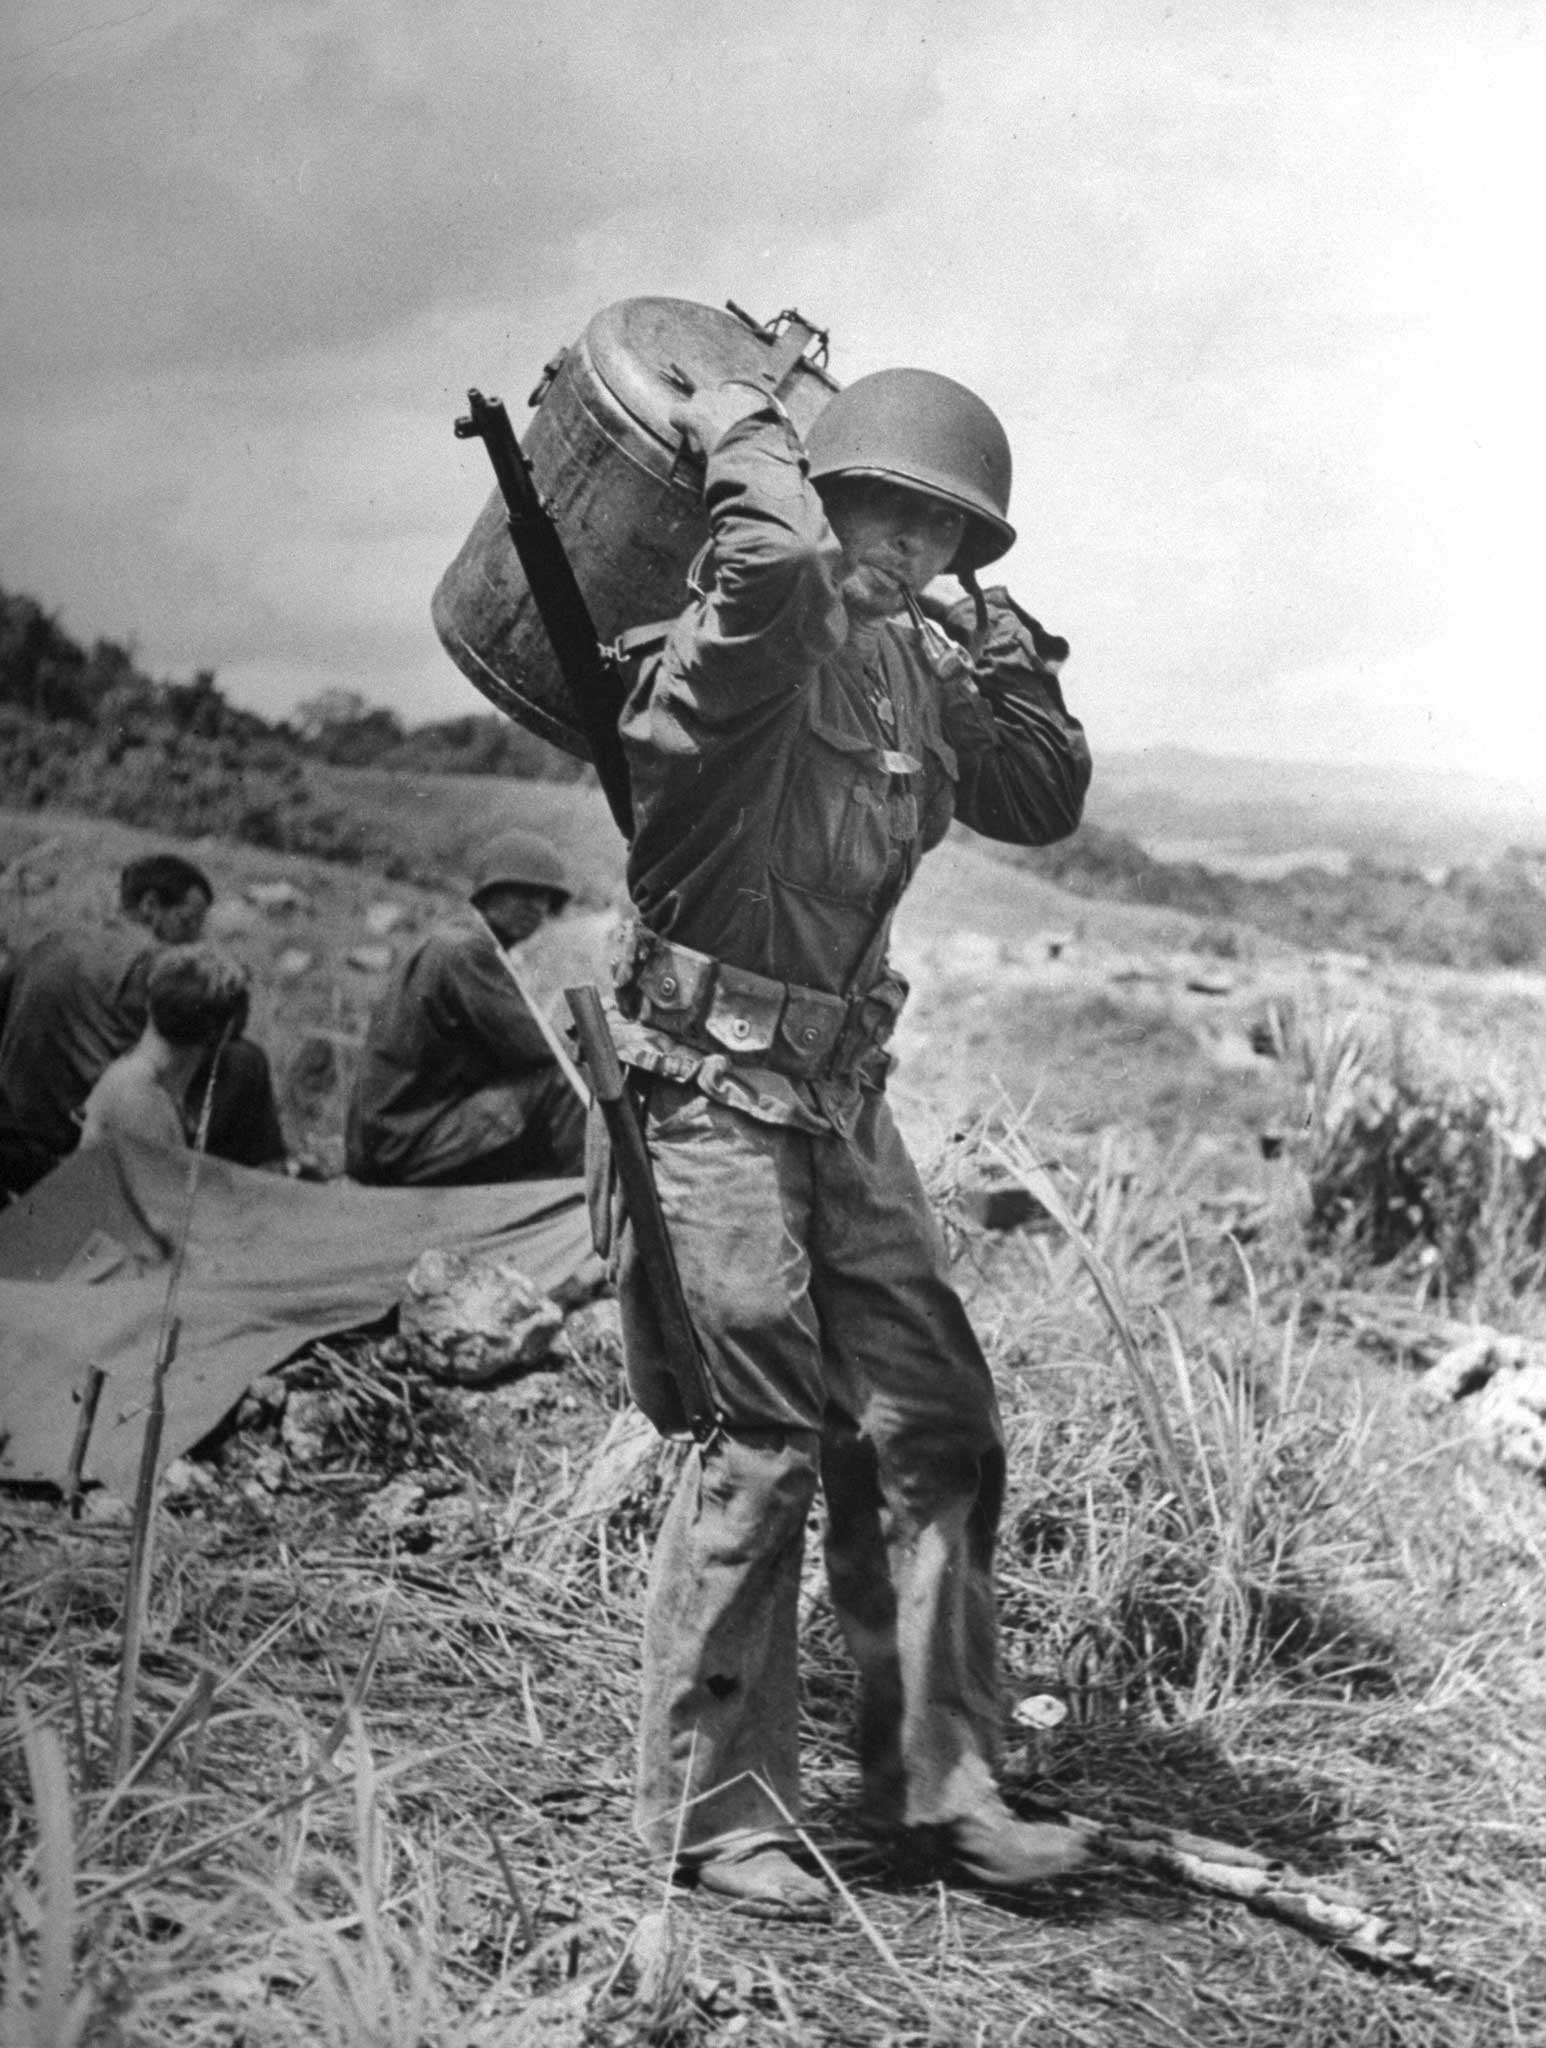 "On his back a wiry, stooped U.S. infantryman, smoking an old pipe, carries a heavy container filled with supplies up over the hills to the front."